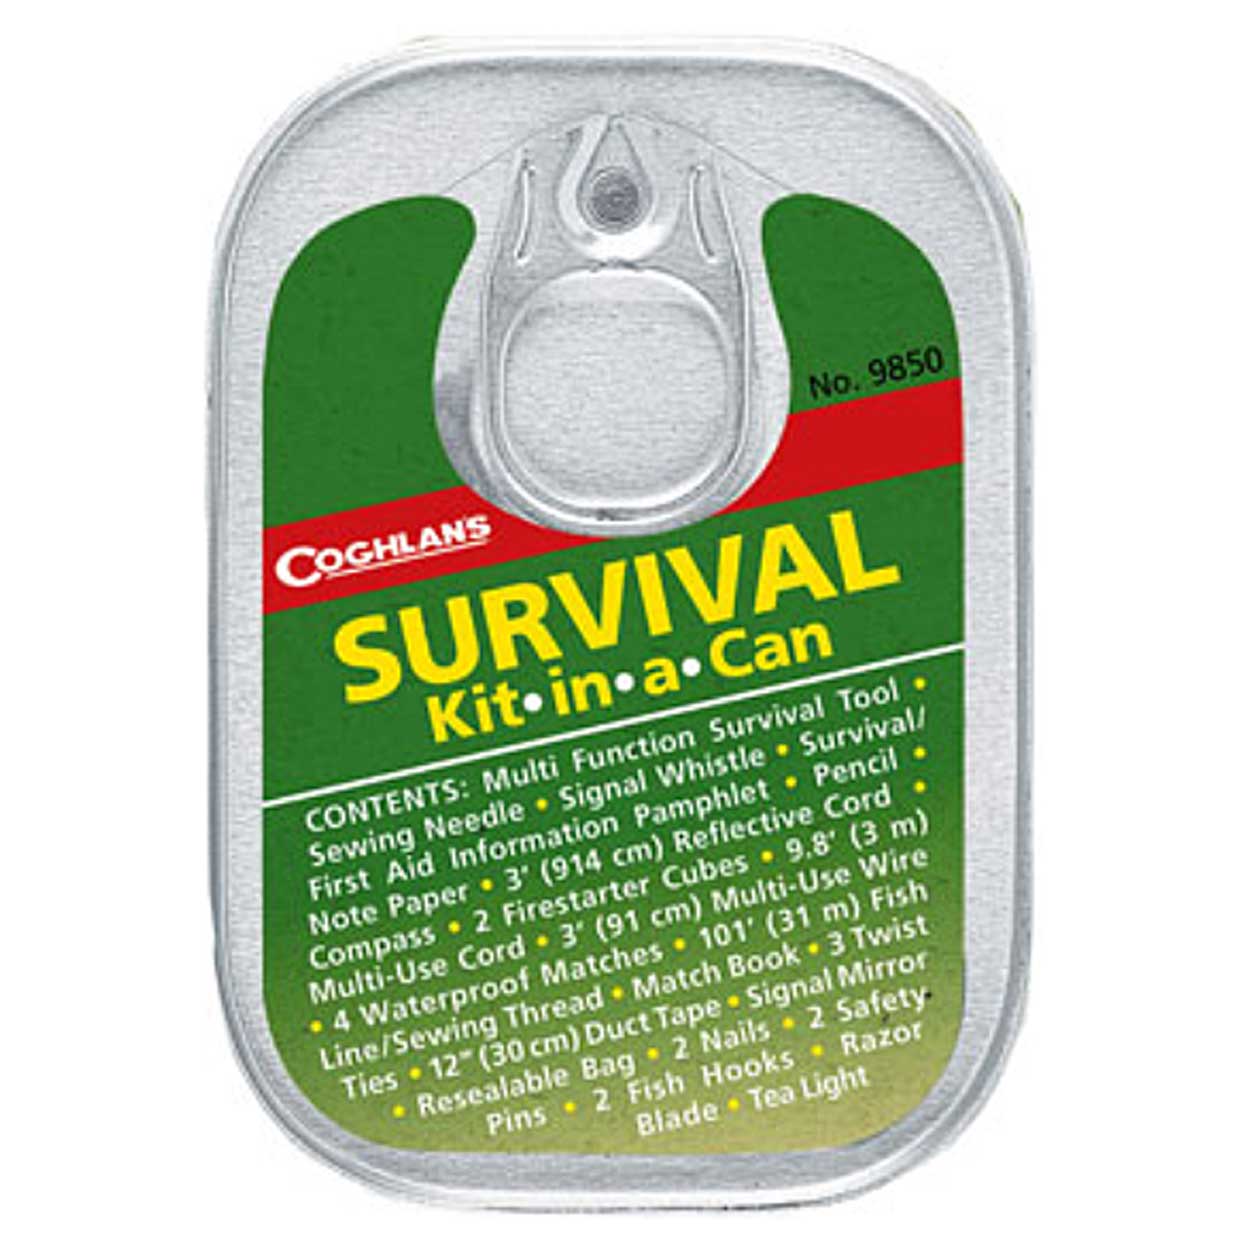 Survival-Kit Kit-in-a-Can